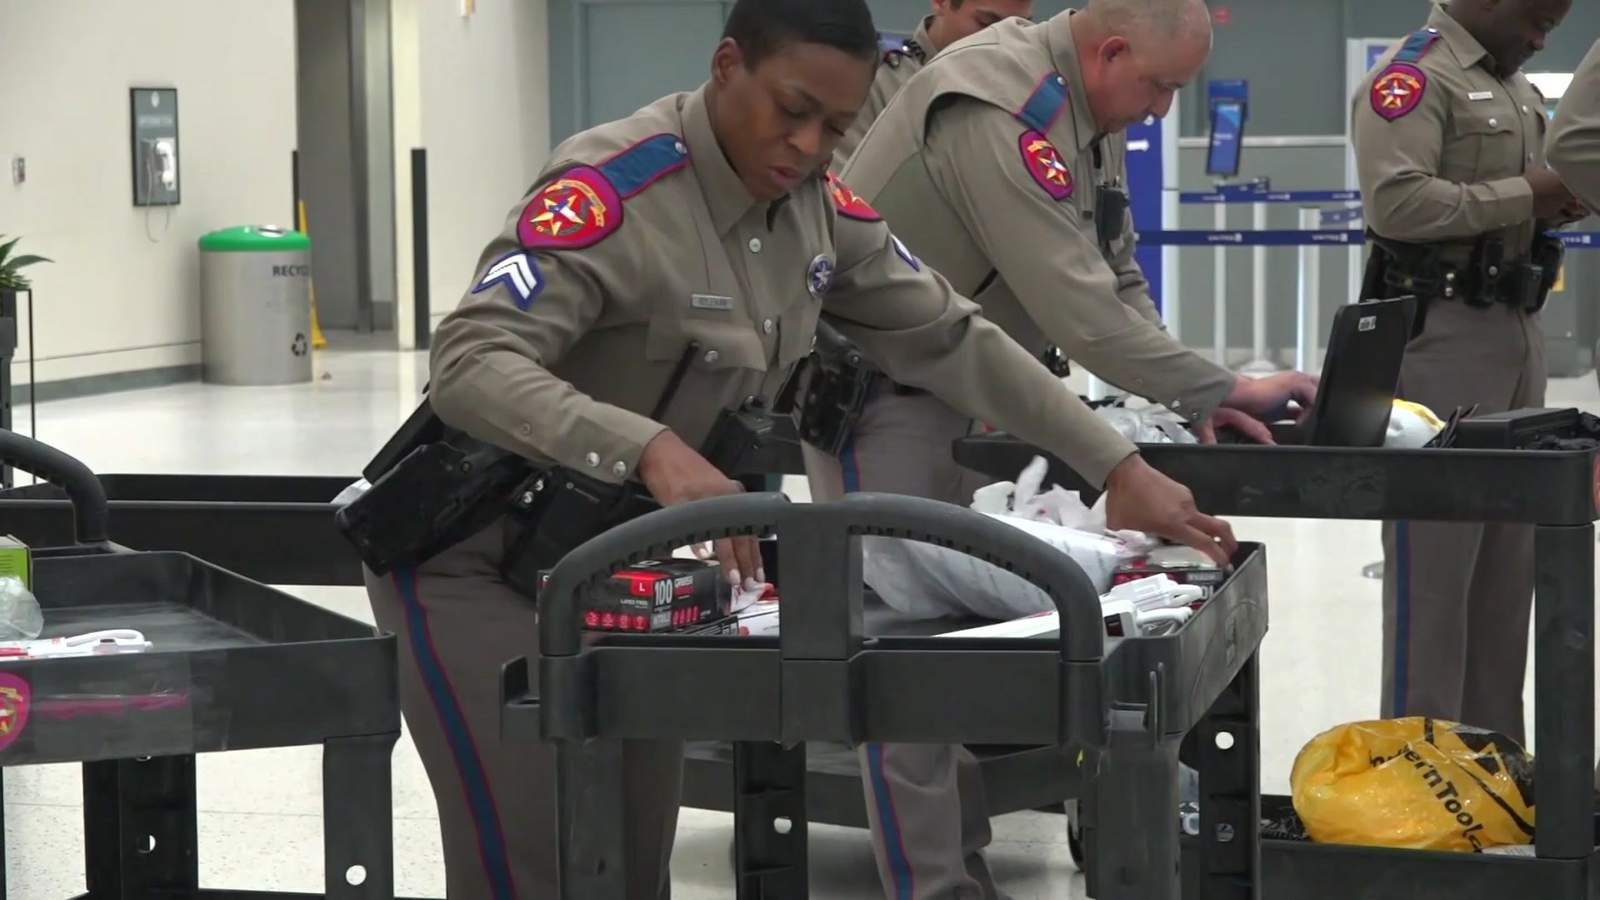 Texas state troopers set up screening for travelers flying in from New Orleans, tri-state area